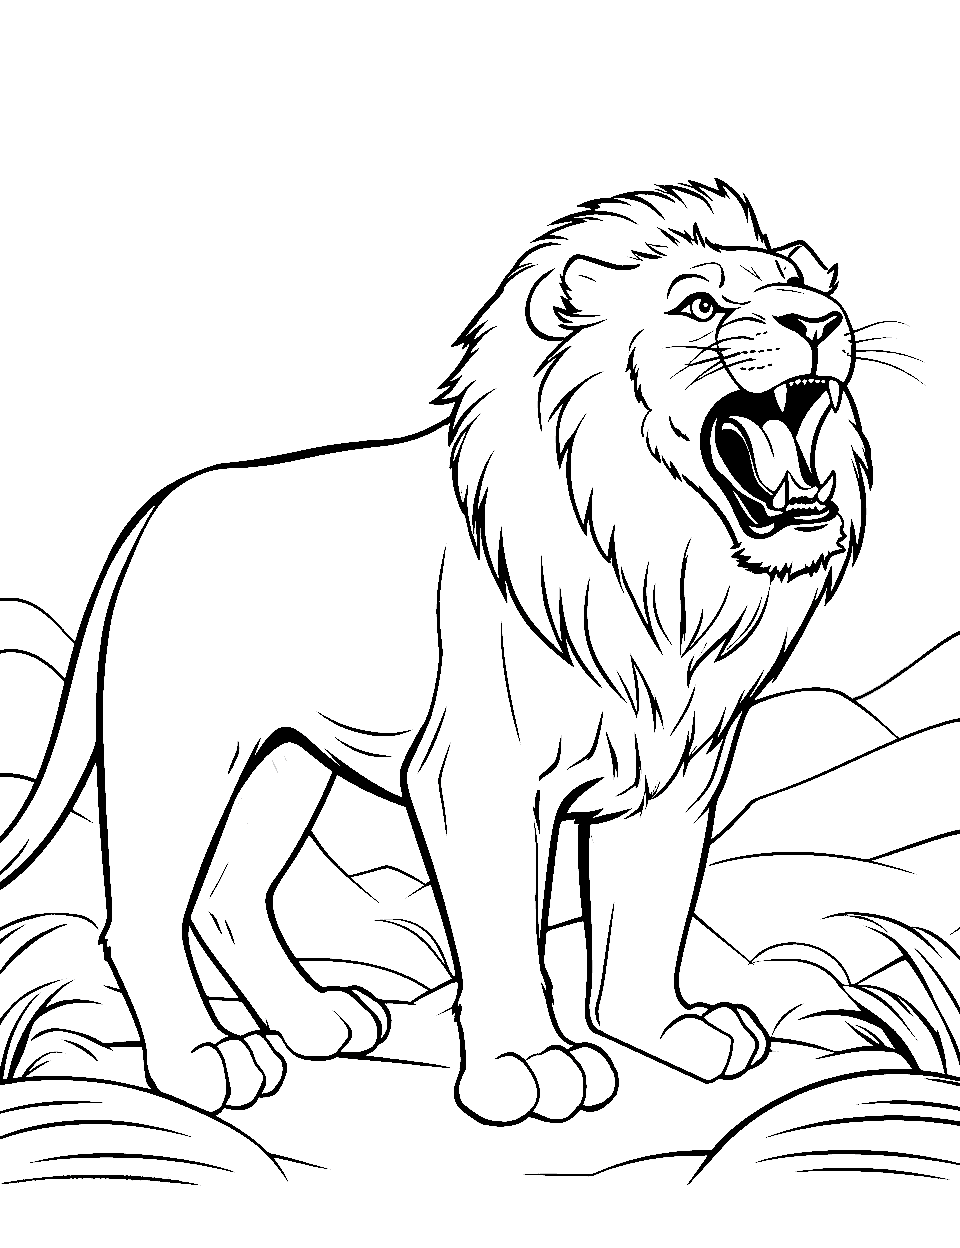 Morning Roar Coloring Page - A lion roaring to greet the morning.